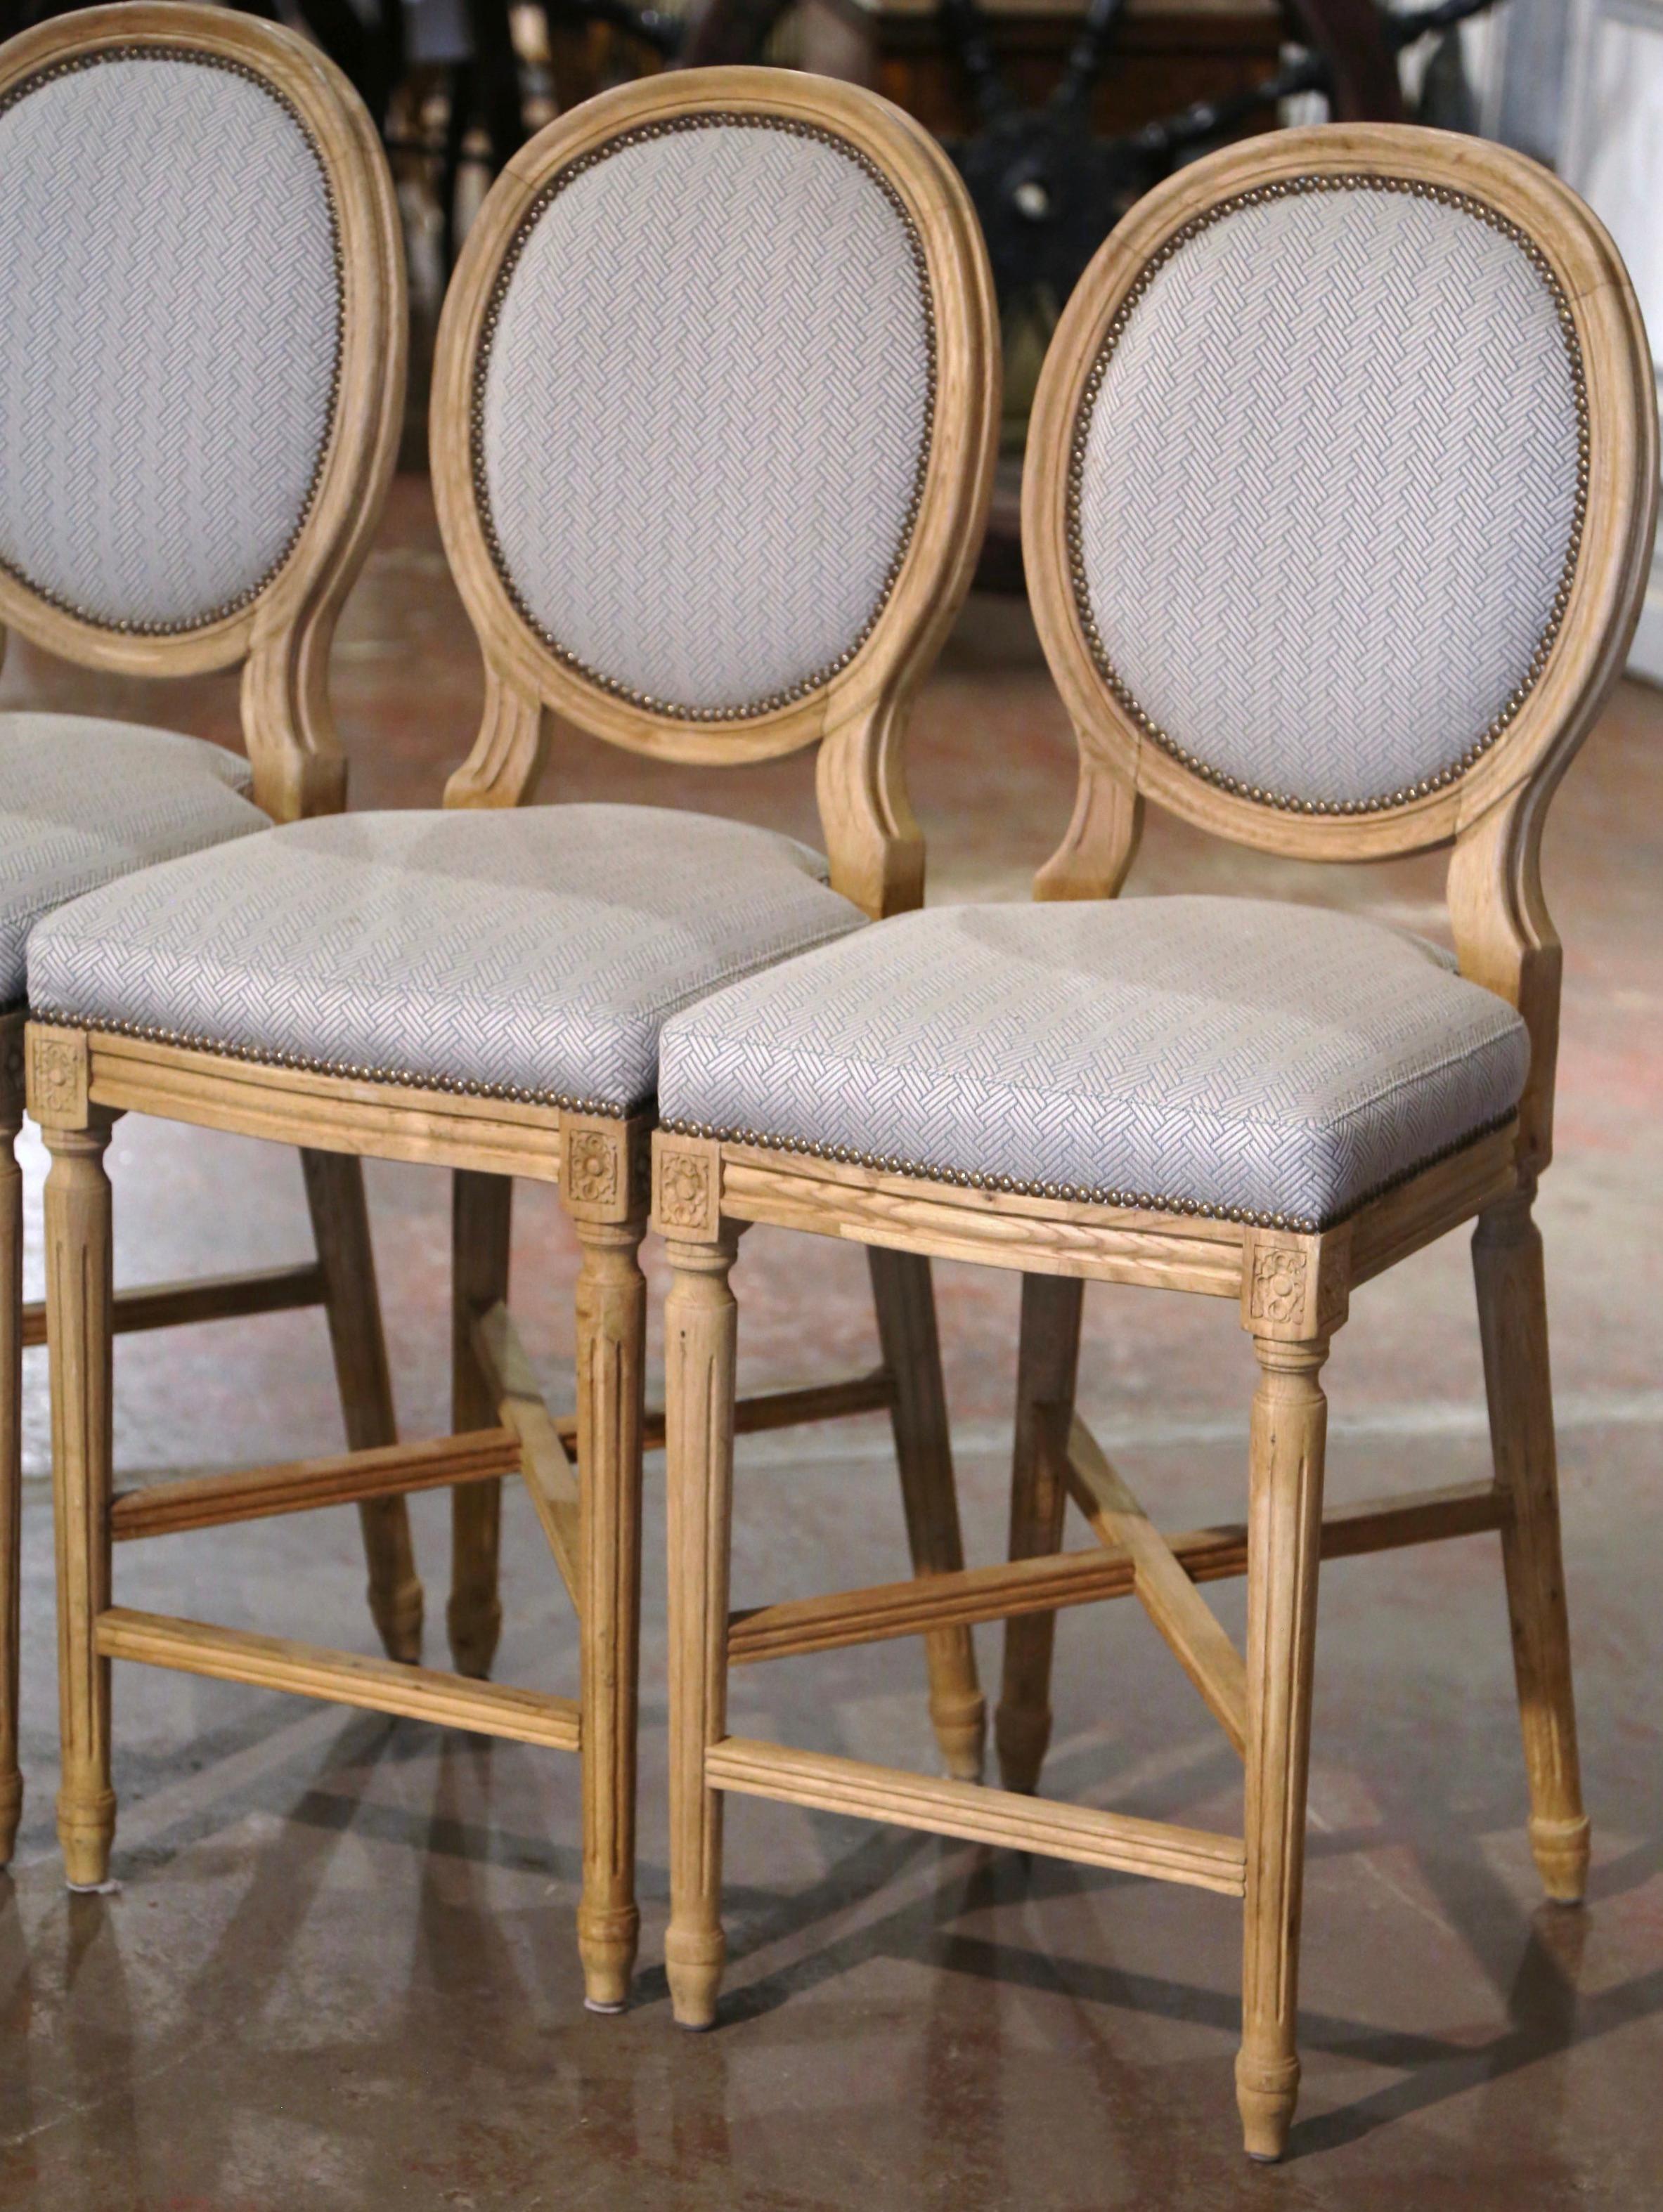 Add a touch of class to your bar or kitchen counter with this elegant suite of five vintage stools. Crafted circa 2000, the classic barstools are the perfect height for a 36 to 38